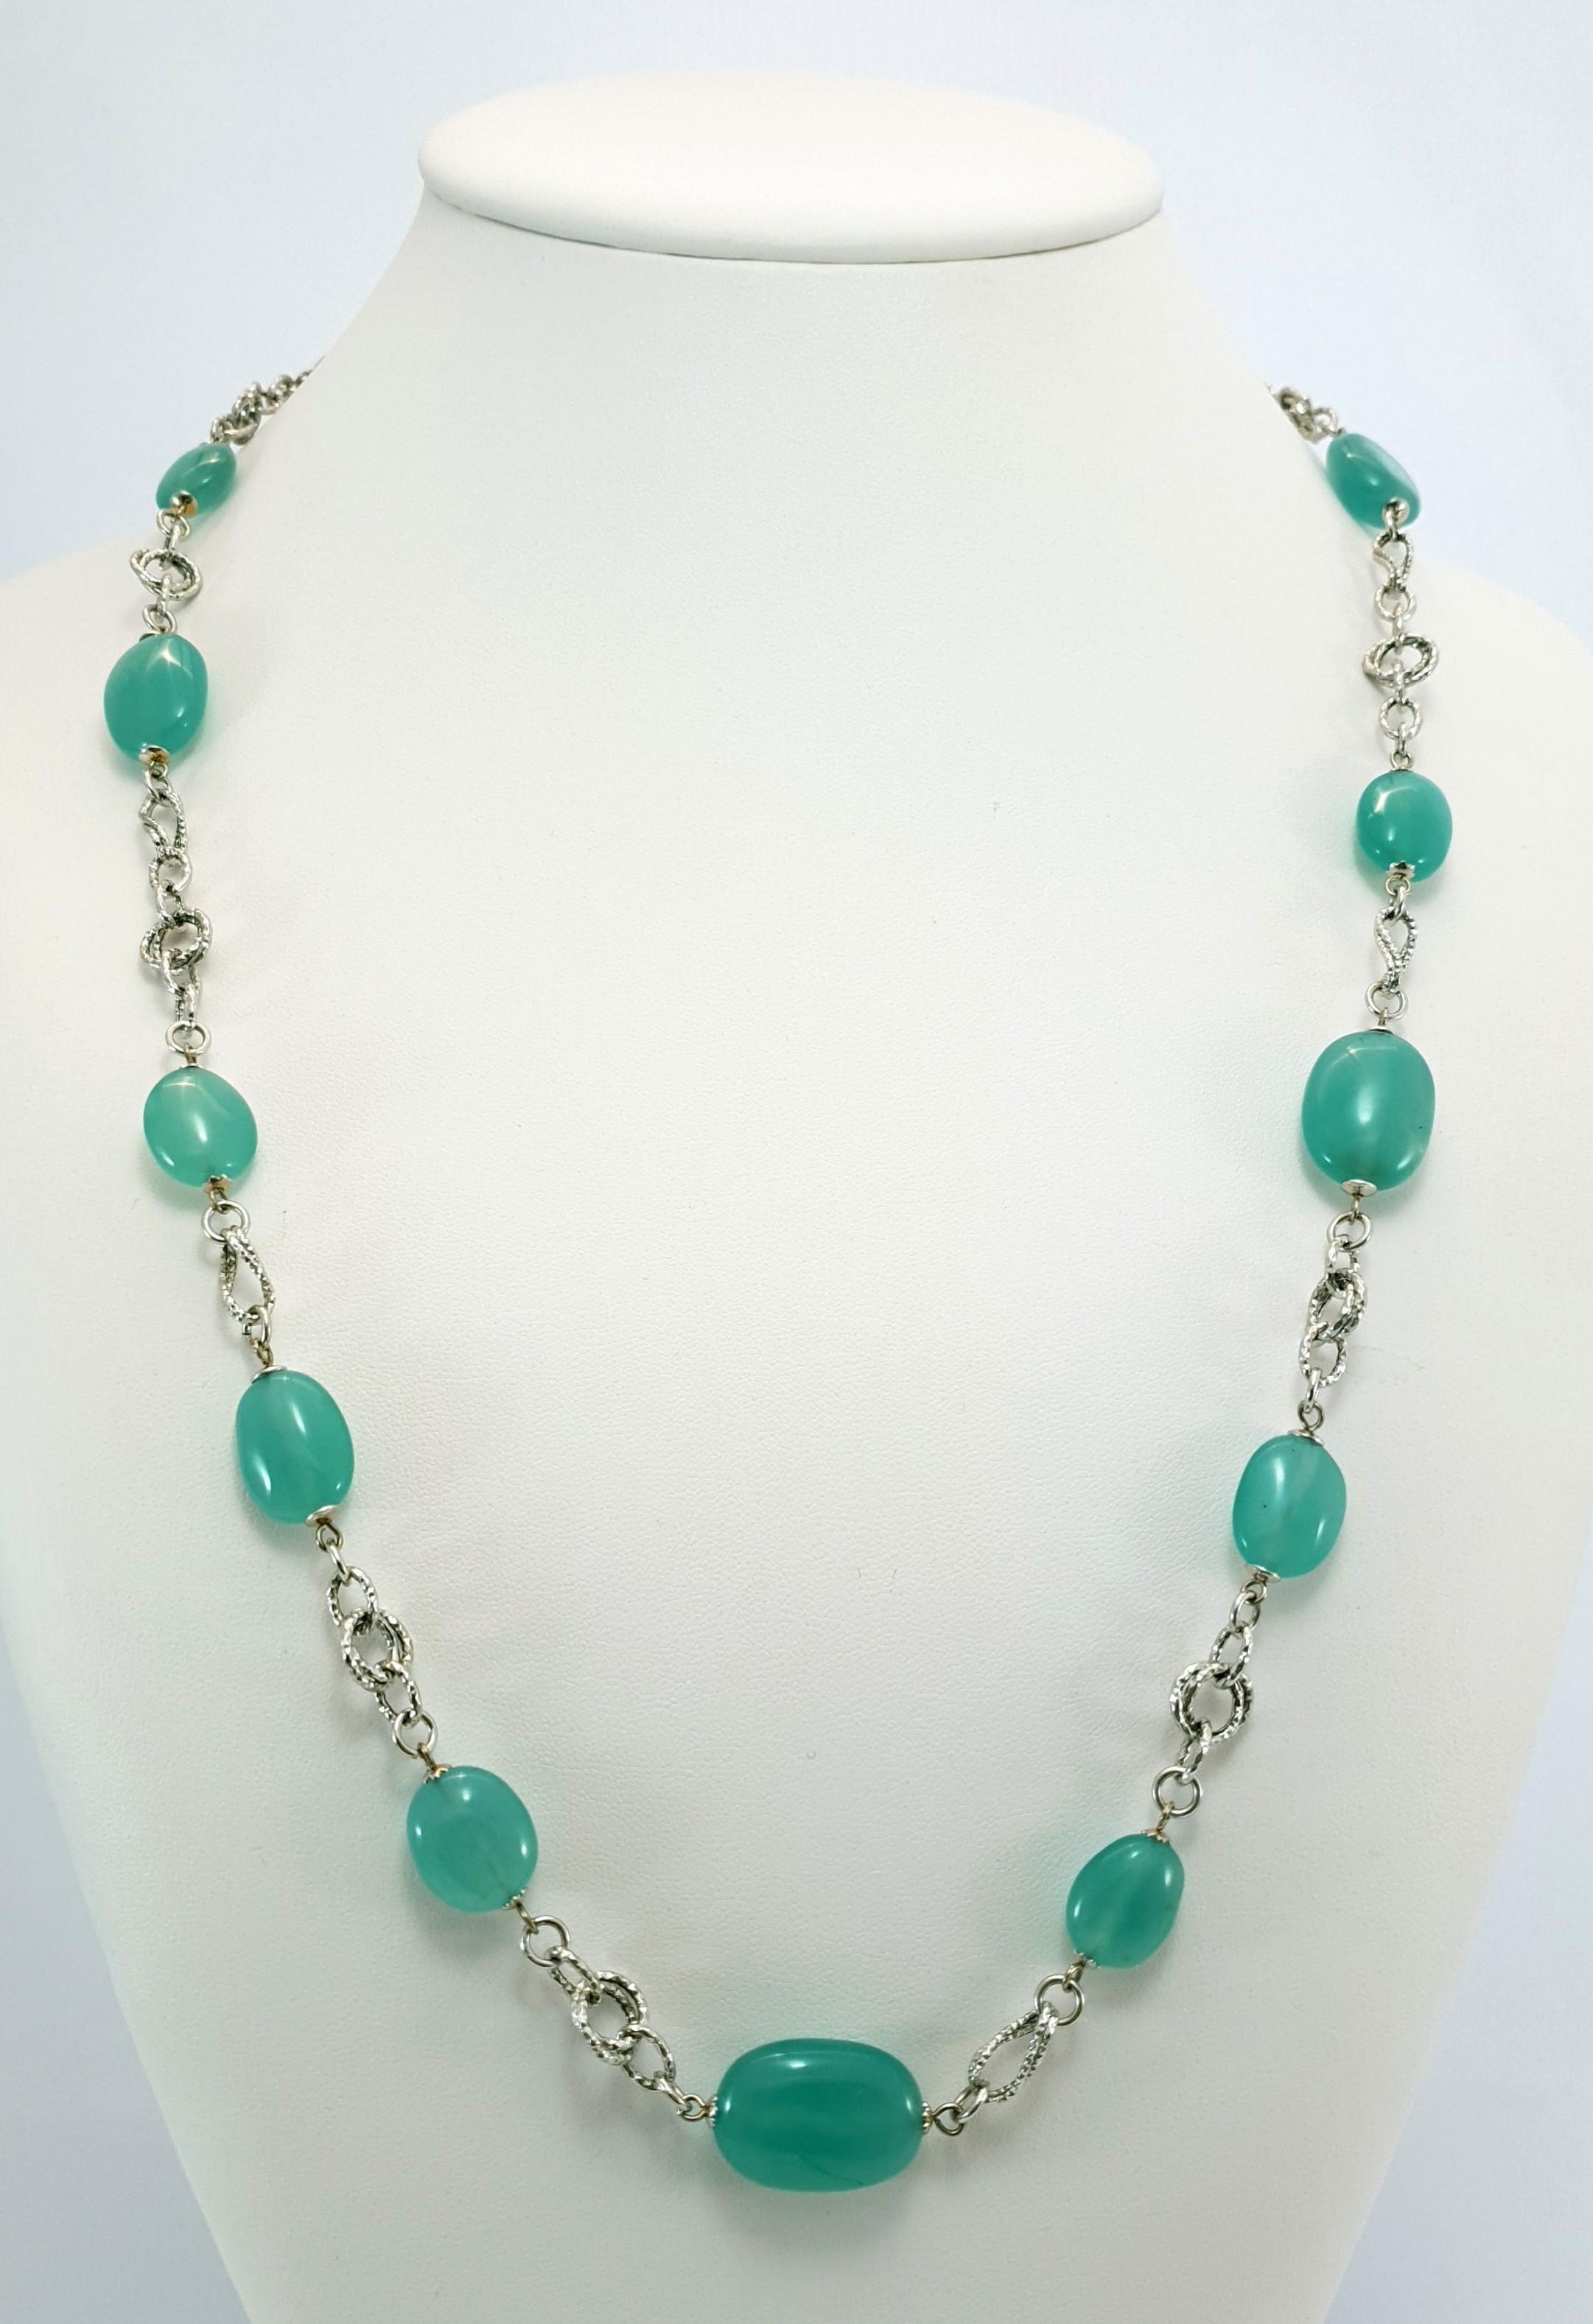 This natural Green Chalcedony Baroque Bead Necklace with 18 Carat White Gold is hand cut and crafted in Germany.
The lobster clasp holds the necklace securely around the neck.
Depending on the occasion, the necklace can be worn once or twice around